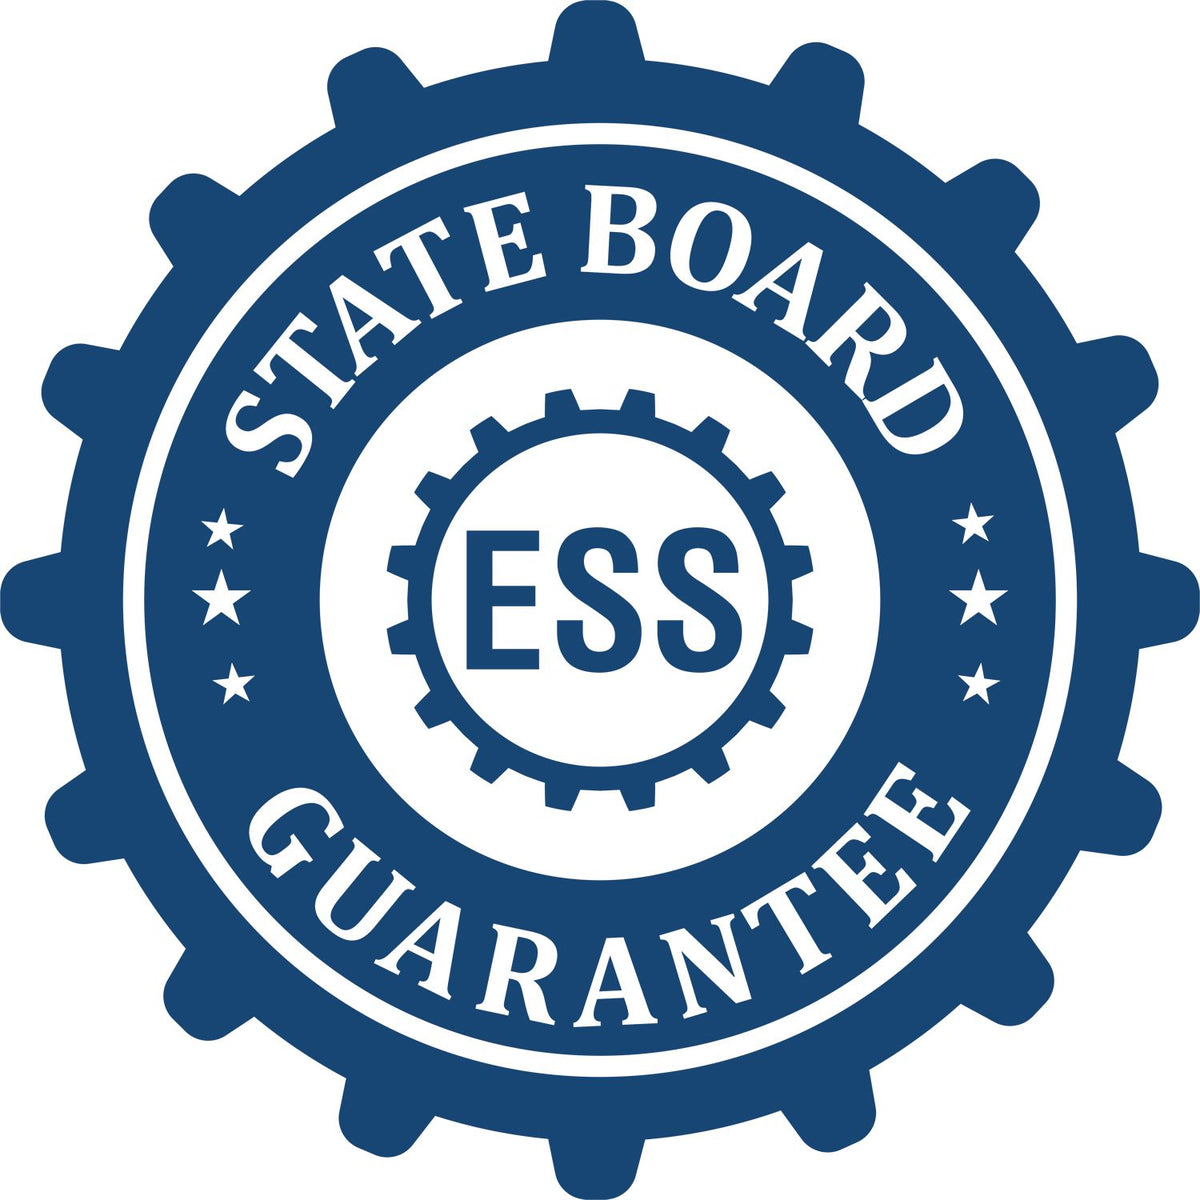 An emblem in a gear shape illustrating a state board guarantee for the Wyoming Landscape Architectural Seal Stamp product.